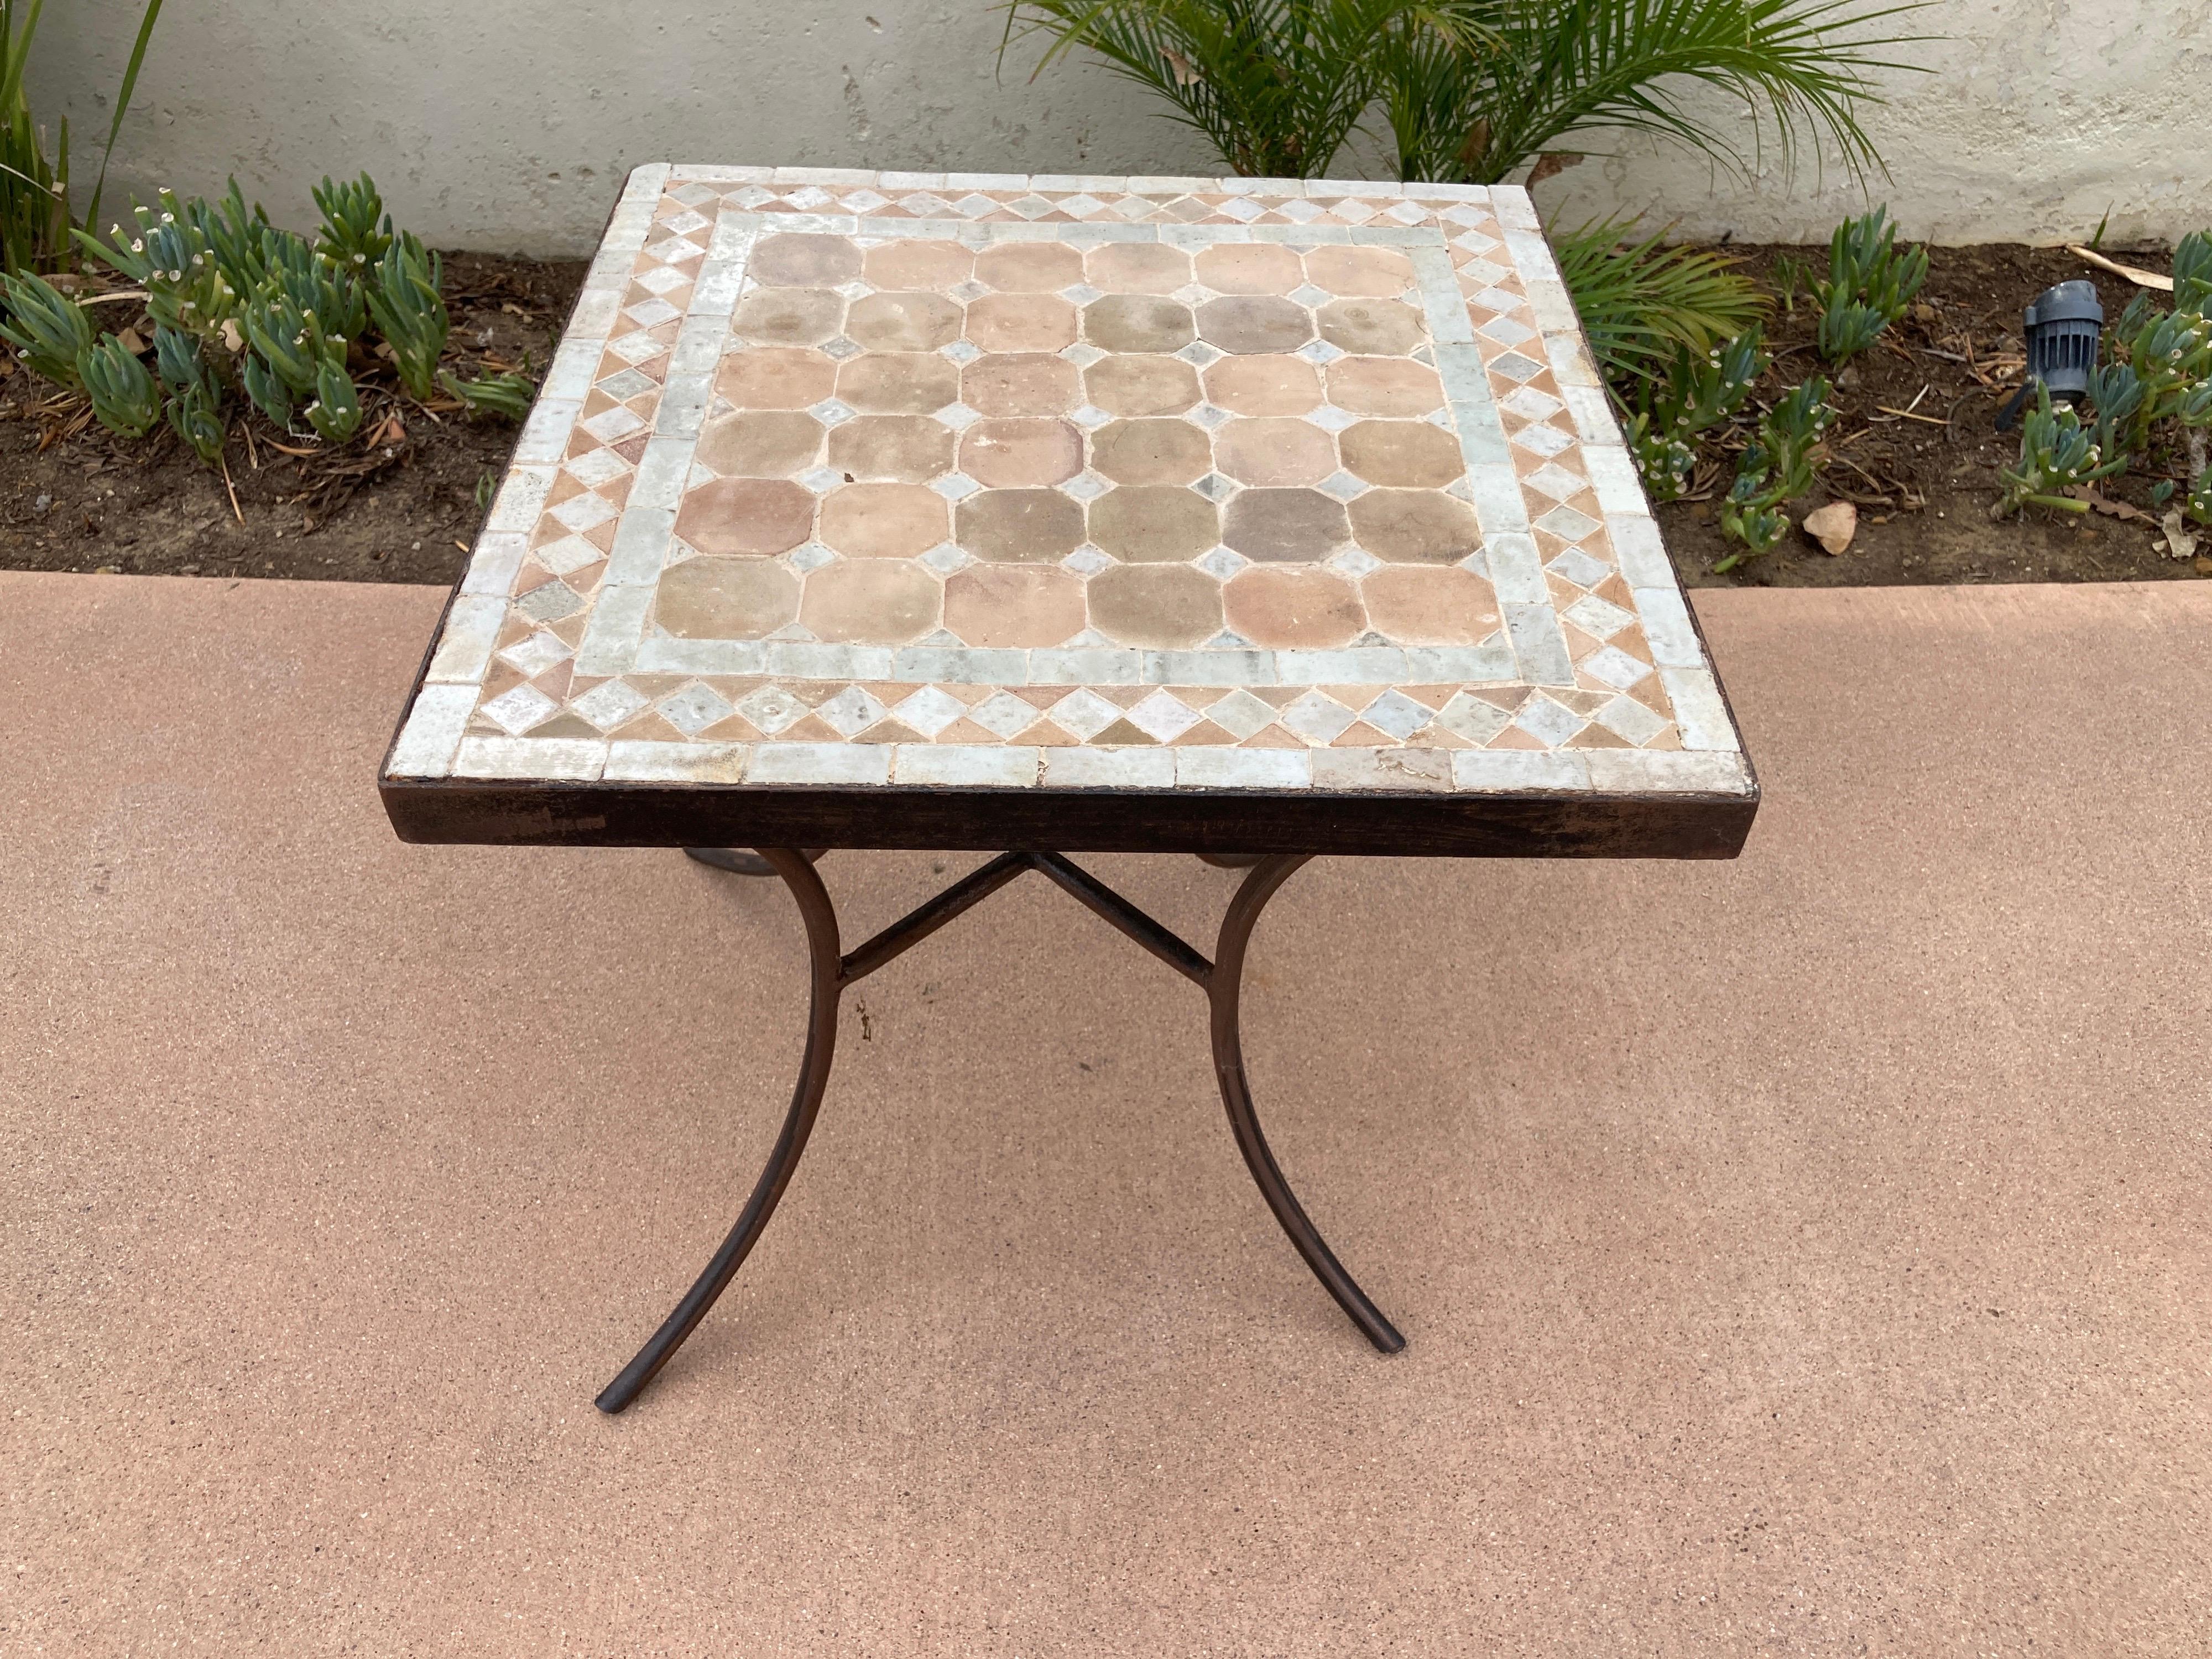 Moroccan mosaic tile square table on iron base. 
Handmade by expert artisans in Fez, Morocco using reclaimed old glazed ivory and tan tiles inlaid in concrete using reclaimed old glazed tiles and making beautiful geometrical designs, the iron base